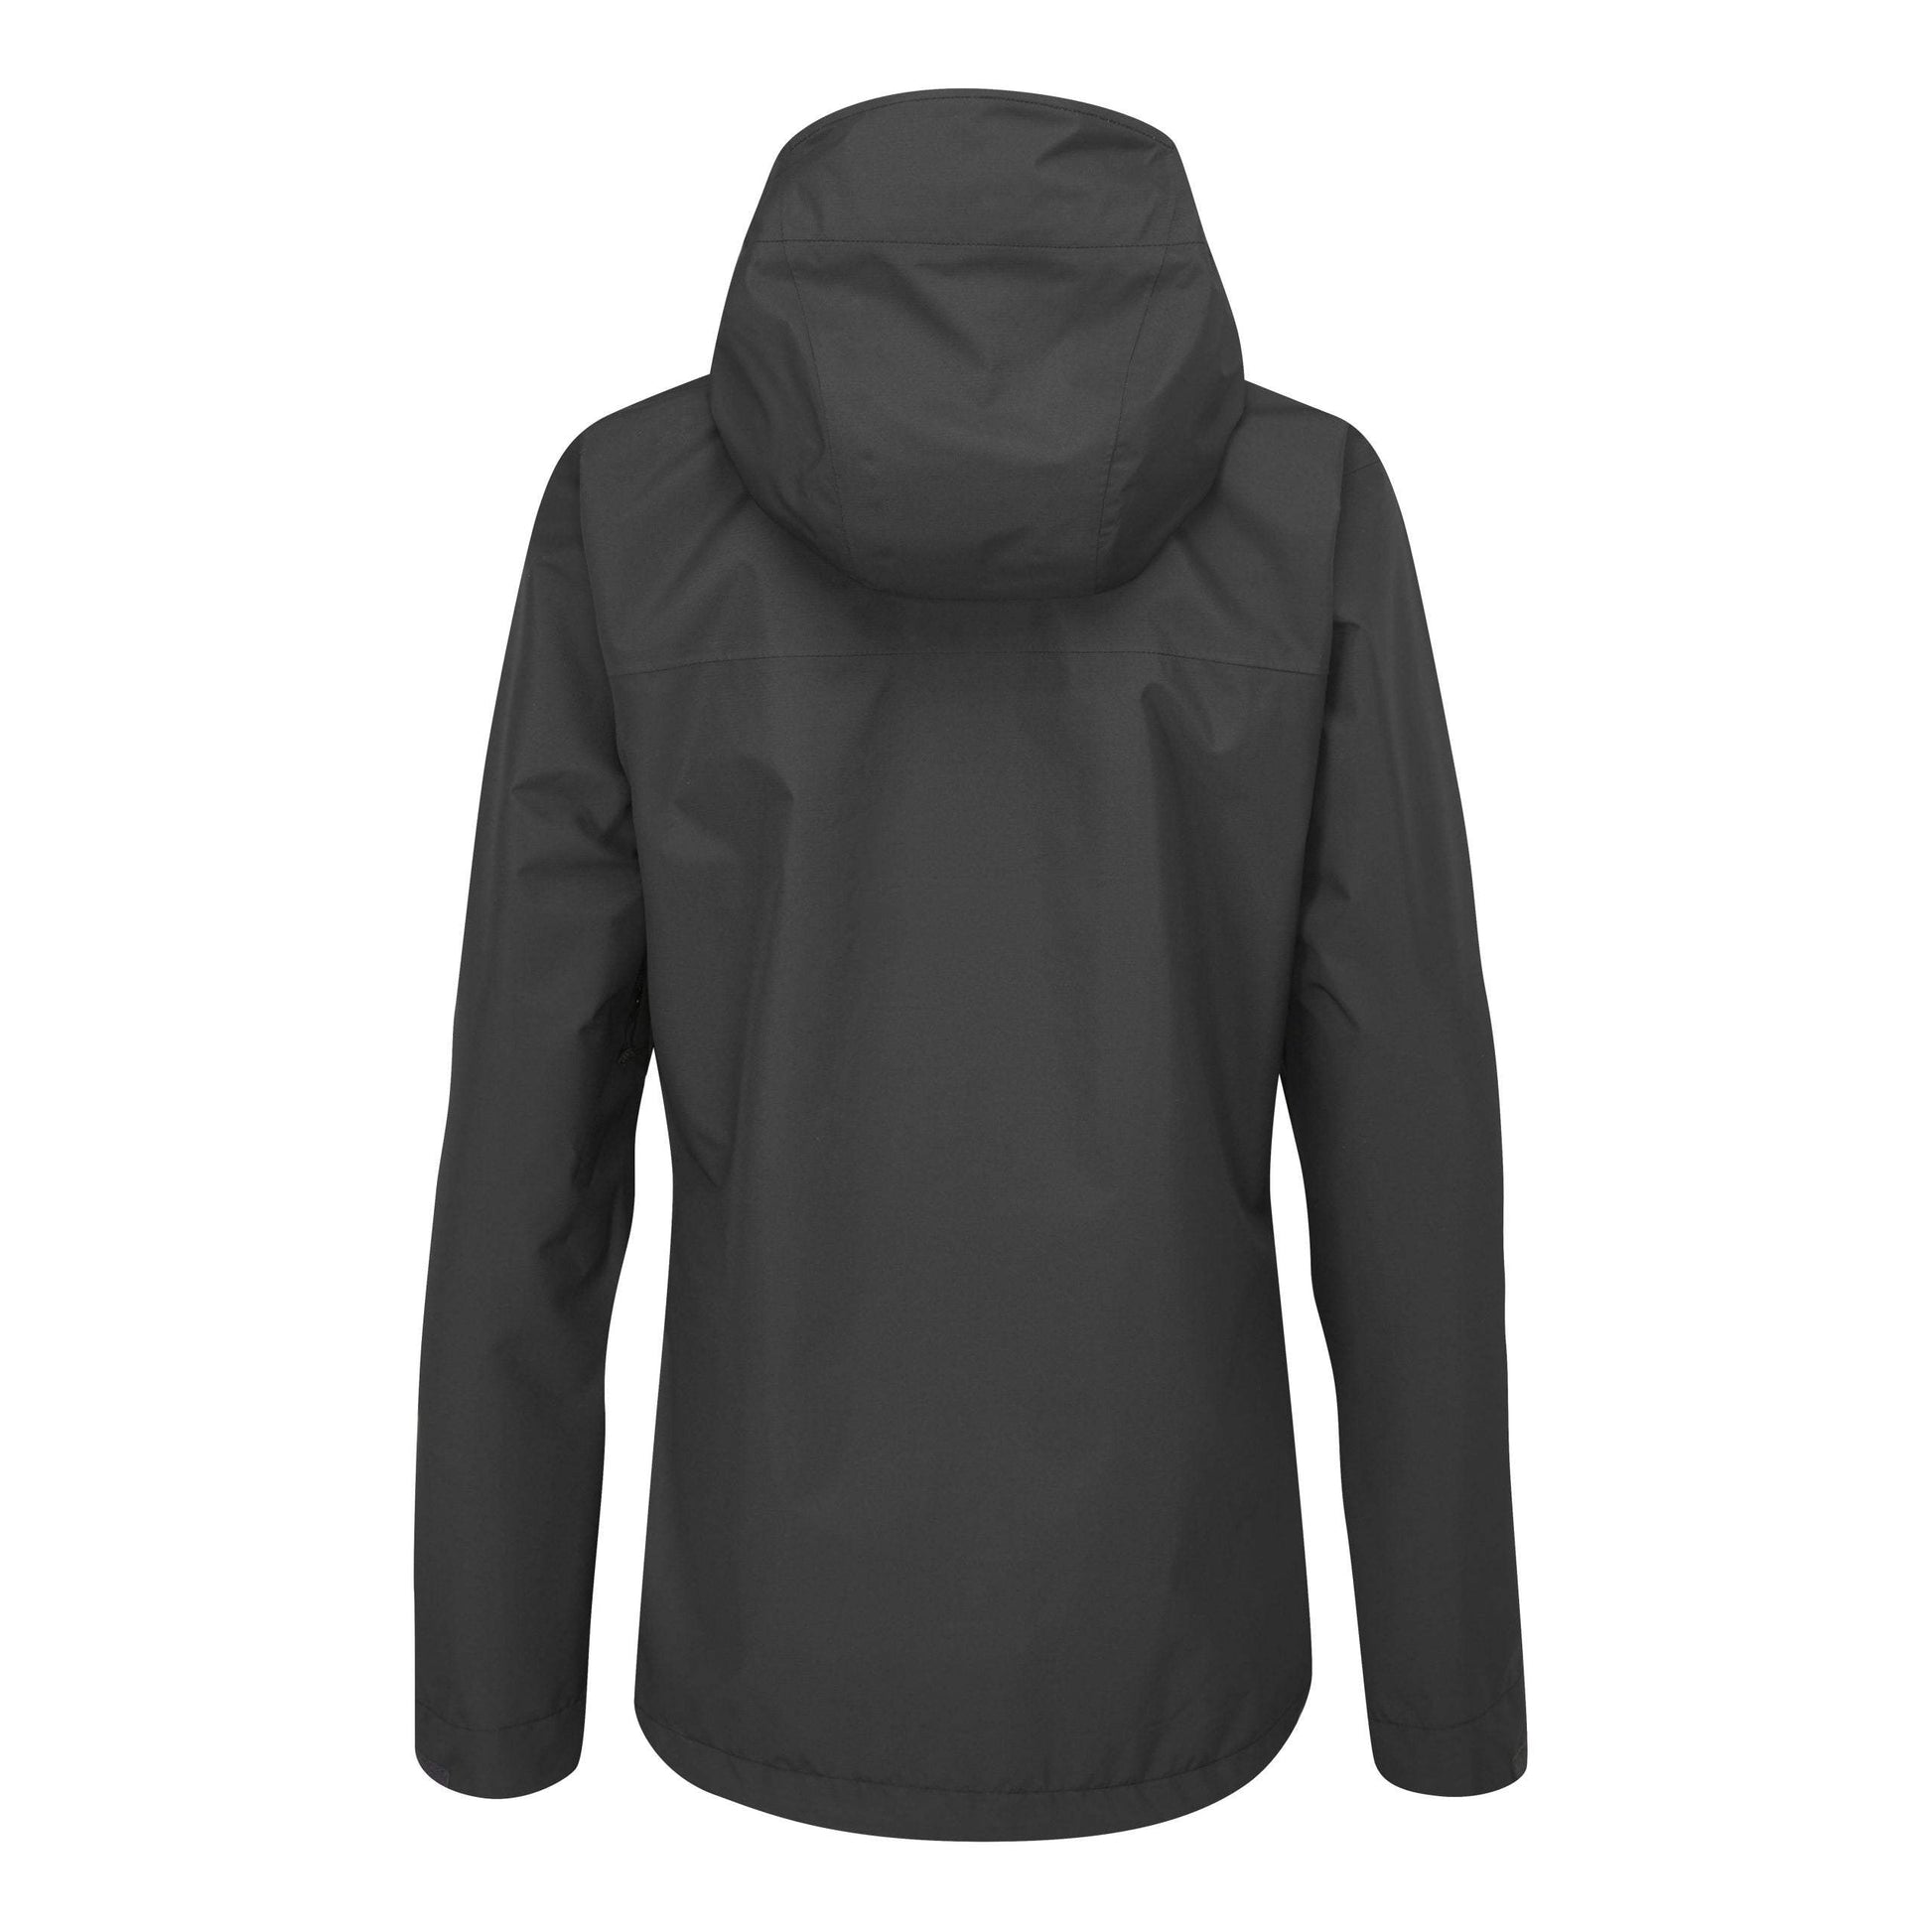 Women's Downpour Eco Jacket by RAB - The Luxury Promotional Gifts Company Limited